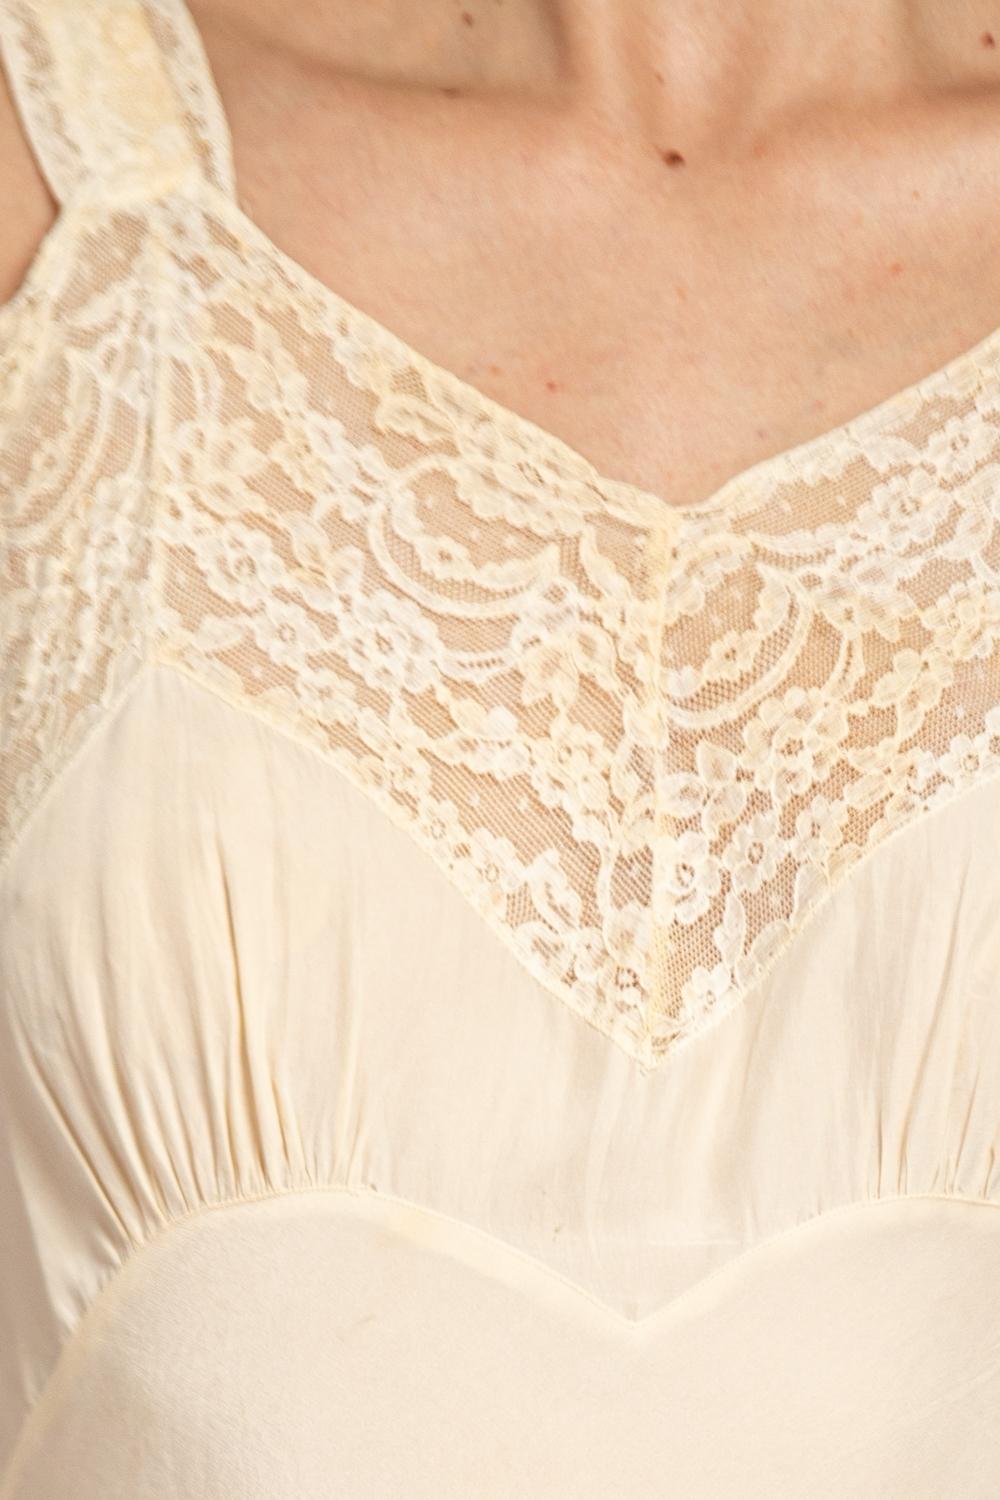 1940S Cream Bias Cut Silk Crepe De Chine Slip With Lace Detail At Top And Bottom For Sale 7